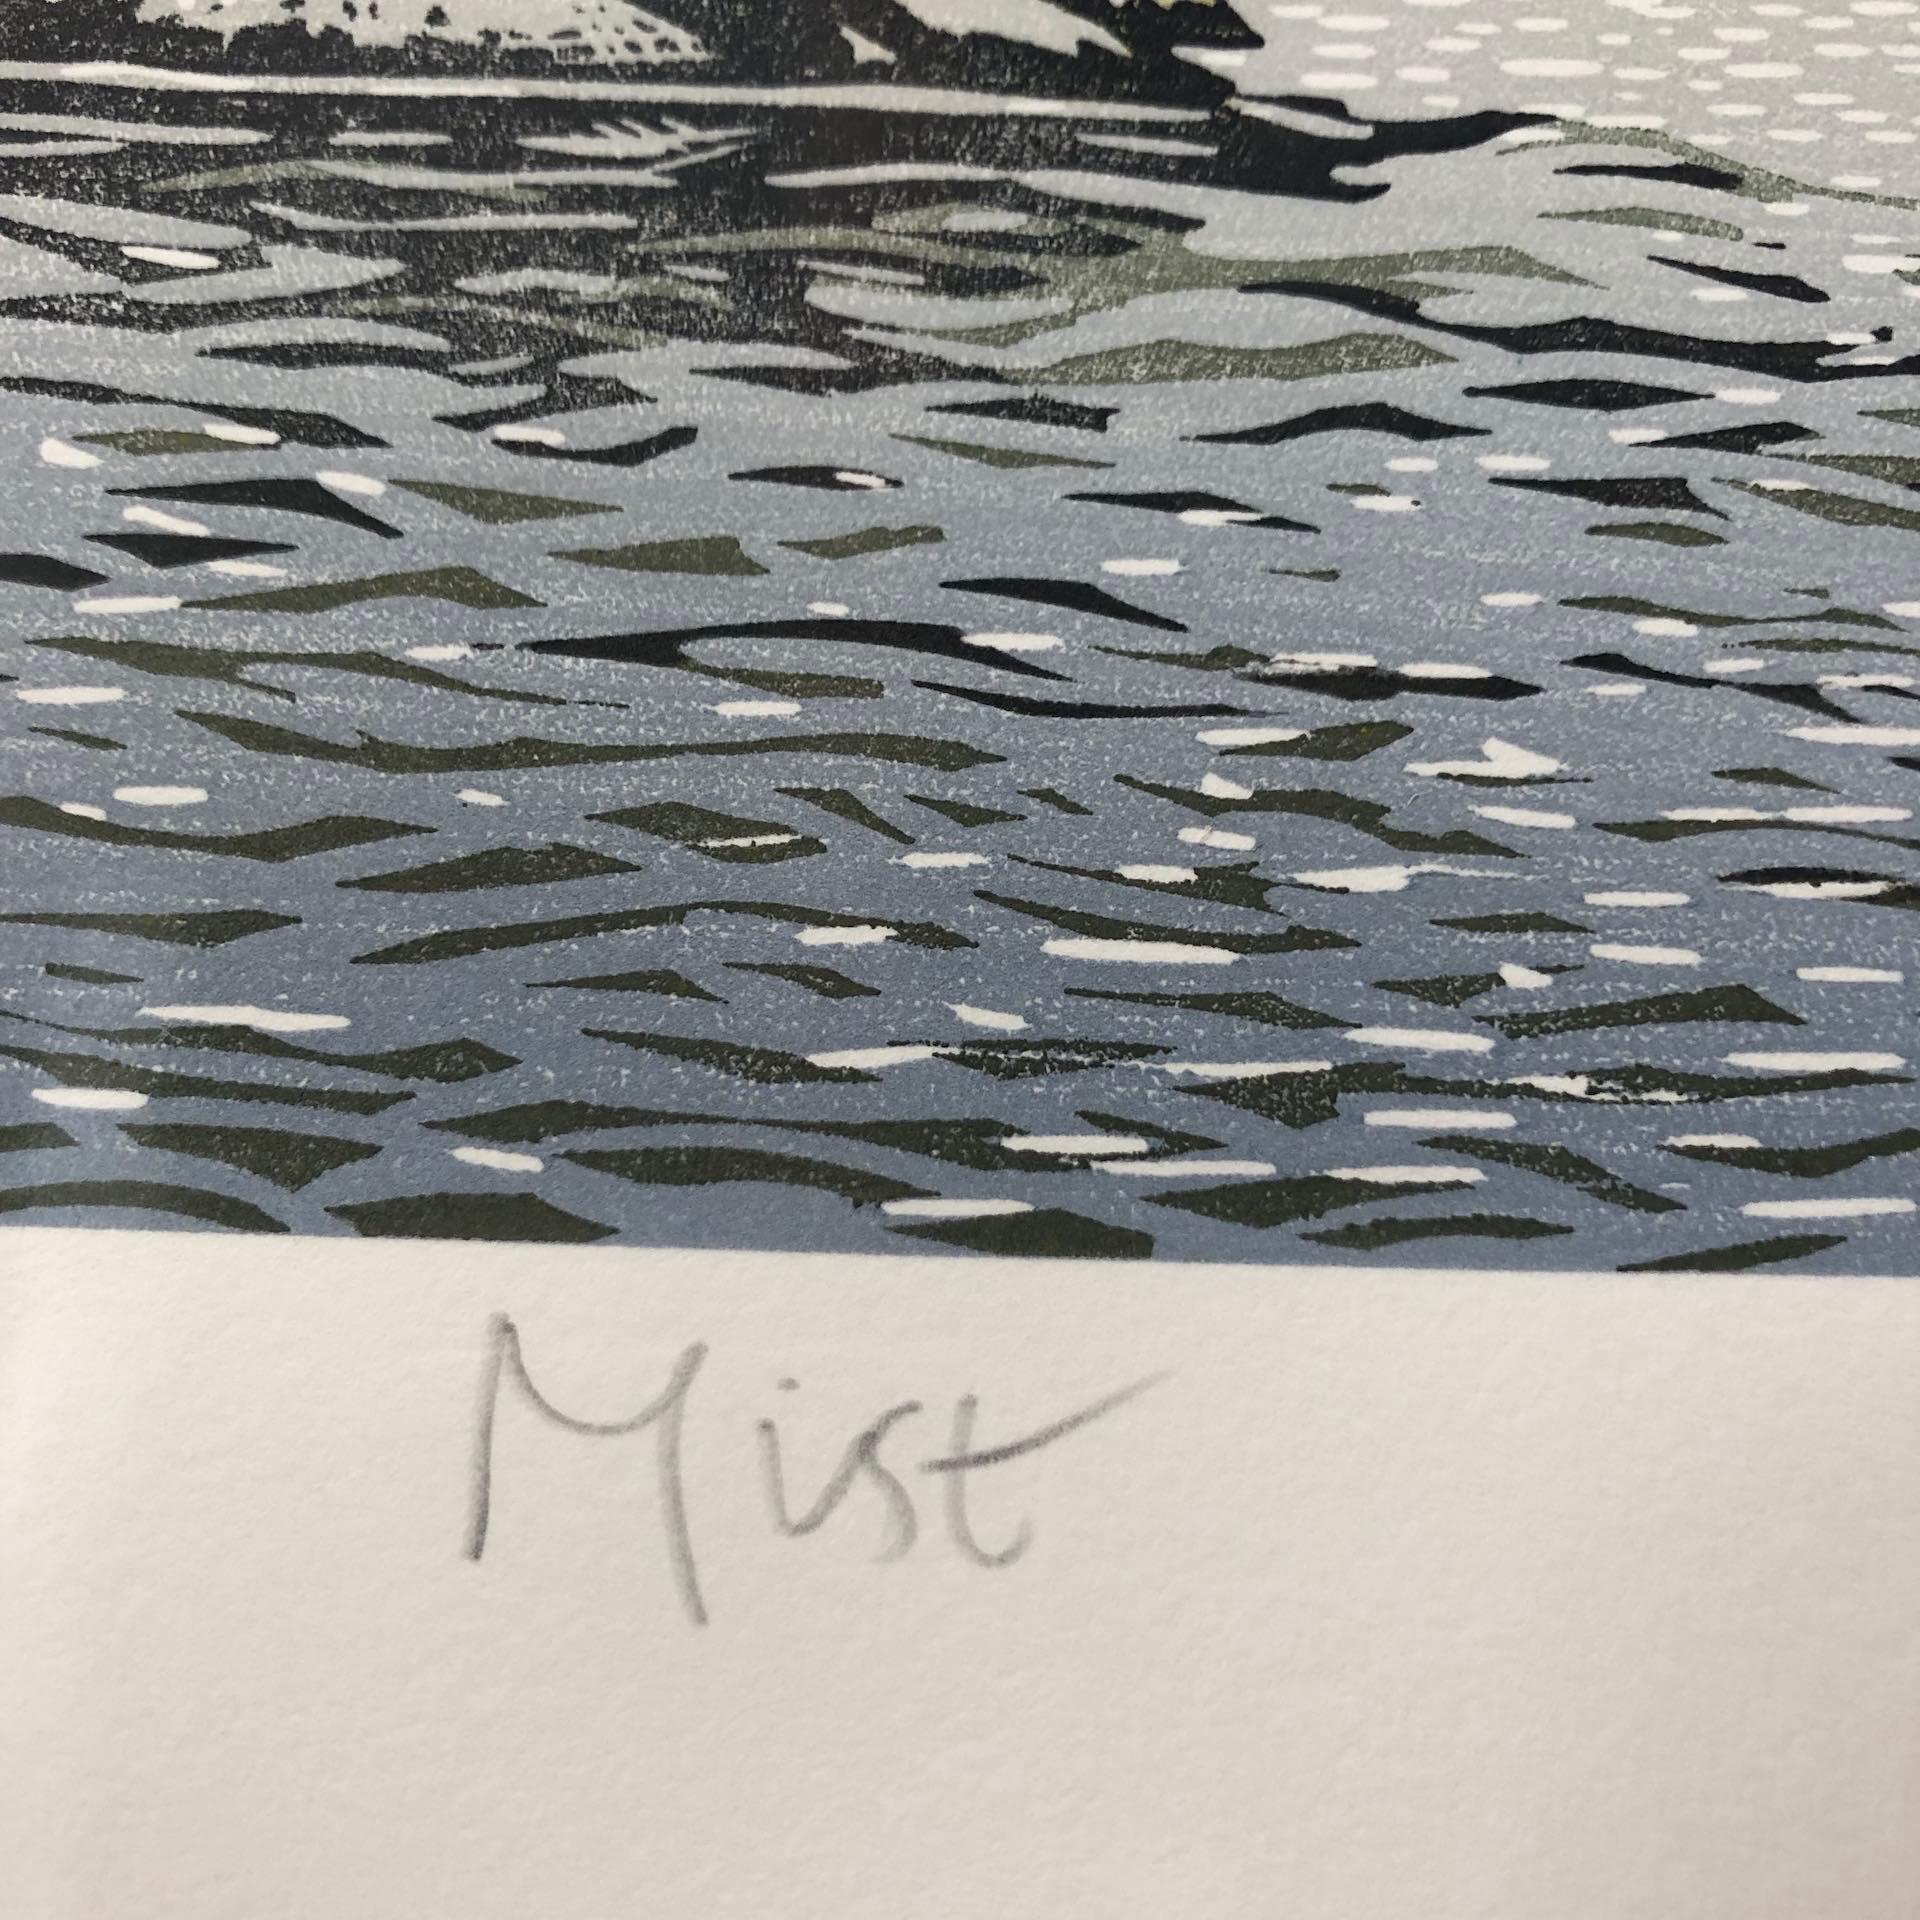 Ian Phillips
Mist
Limited Edition Linocut Print on Paper
Edition of 11
Image Size: H 38cm x W 51cm
Sheet Size: H 40.5m x W 64cm x D 0.01cm
Sold Unframed
Free Shipping

Mist is a limited edition seascape print by Ian Phillips. The blue, grey, green